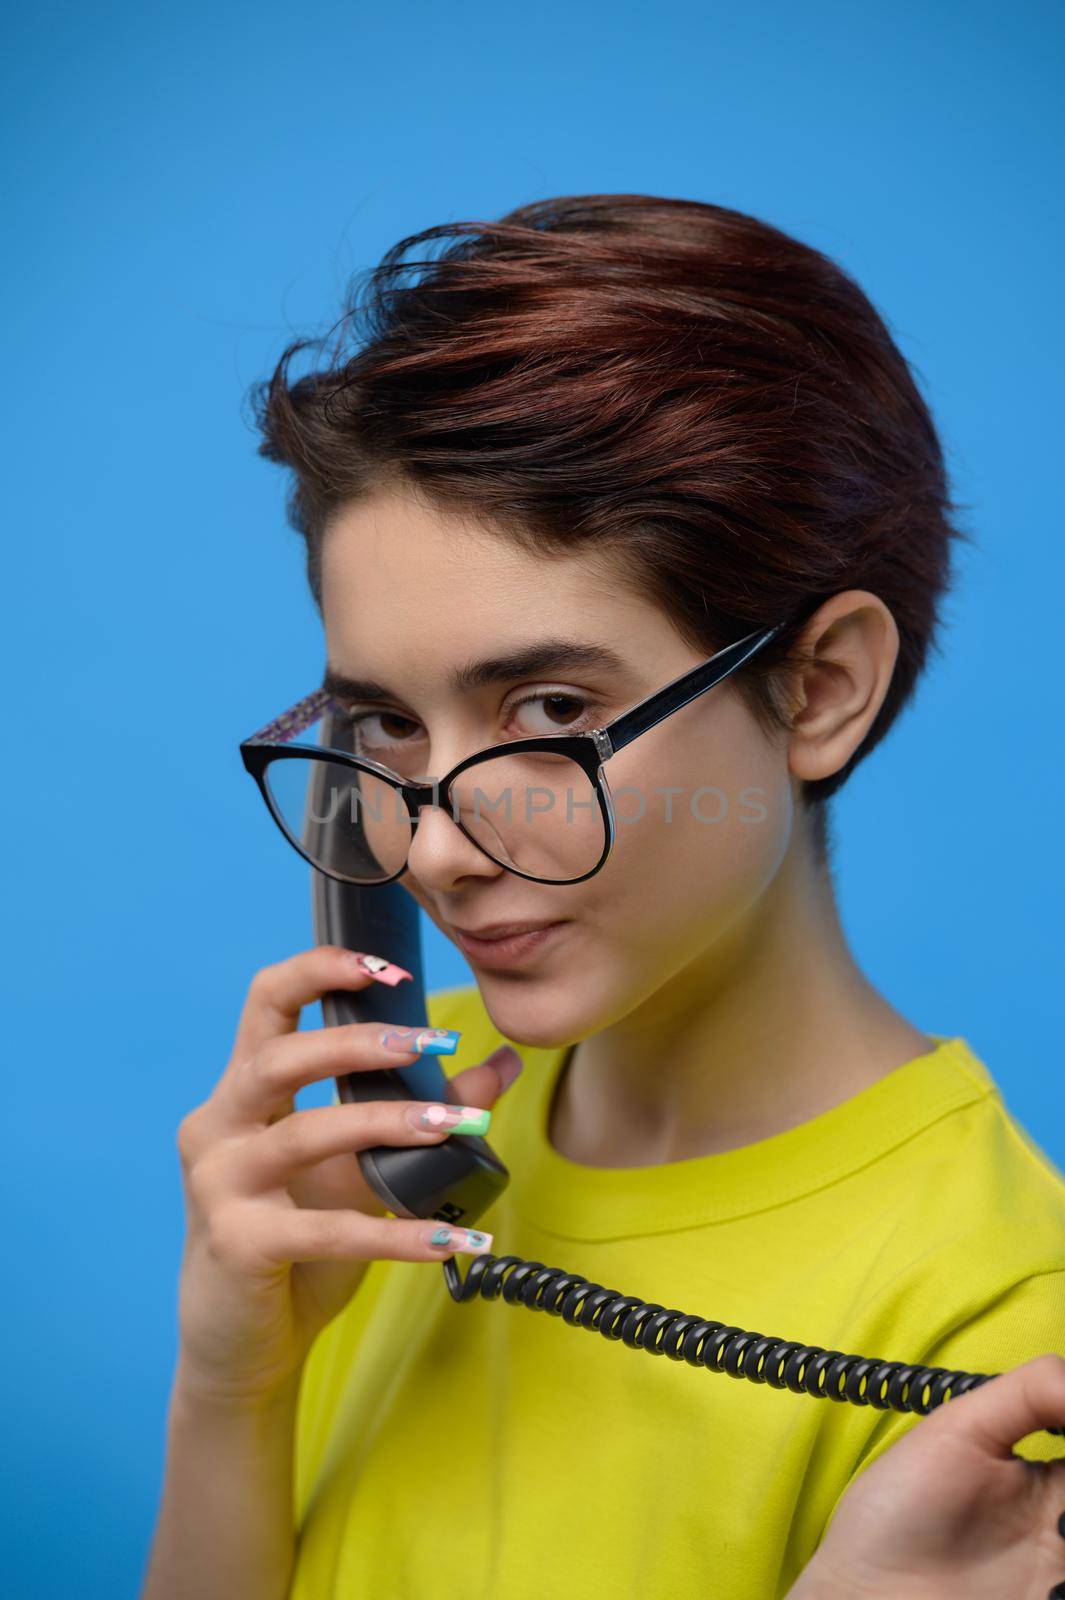 Smiling young pretty brunette guirl with extravagant nail art having conversation using old fashioned phone, studio shot at blue background